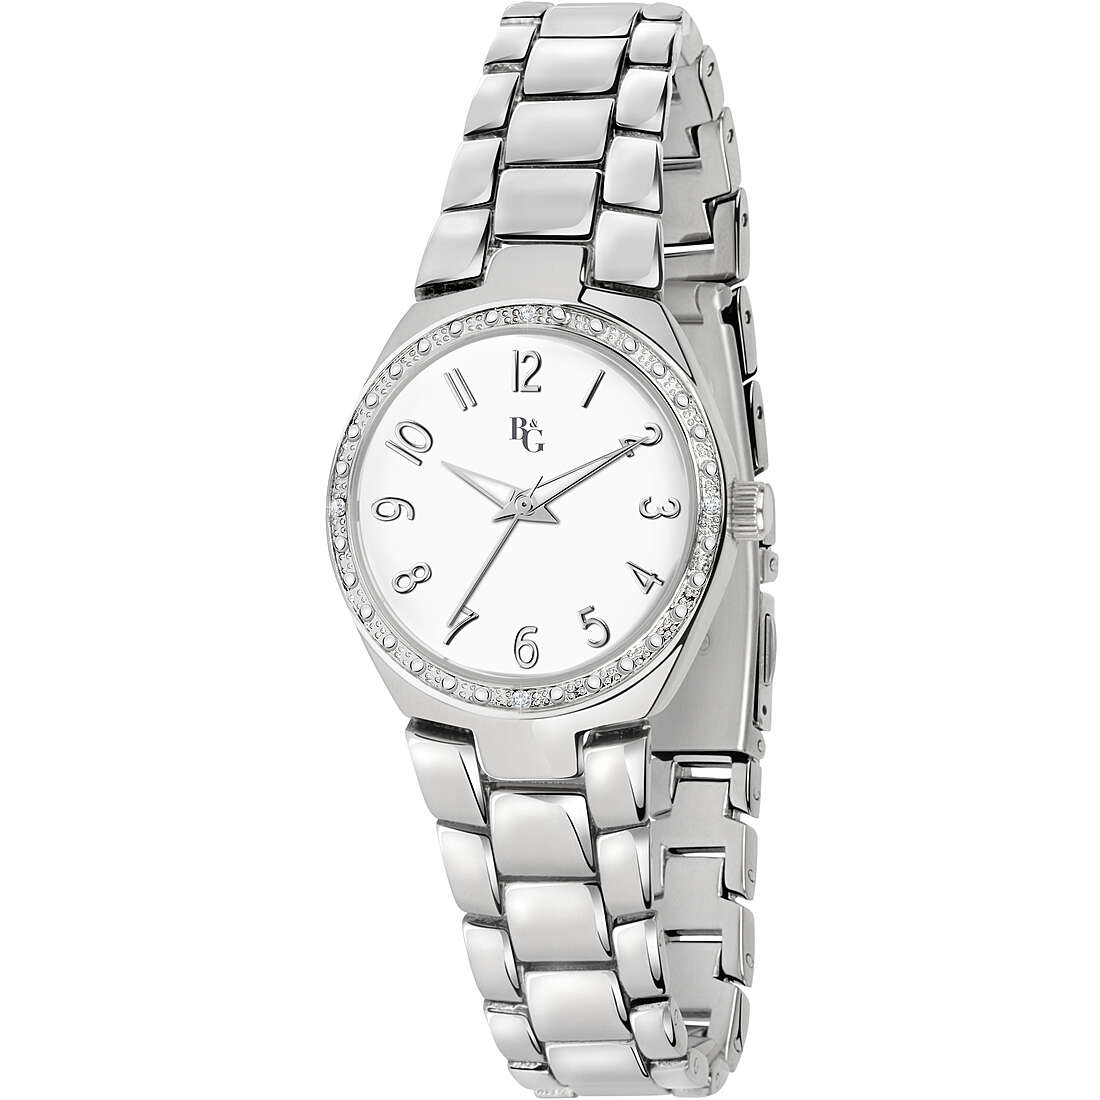 only time watch Steel White dial woman R3853278501